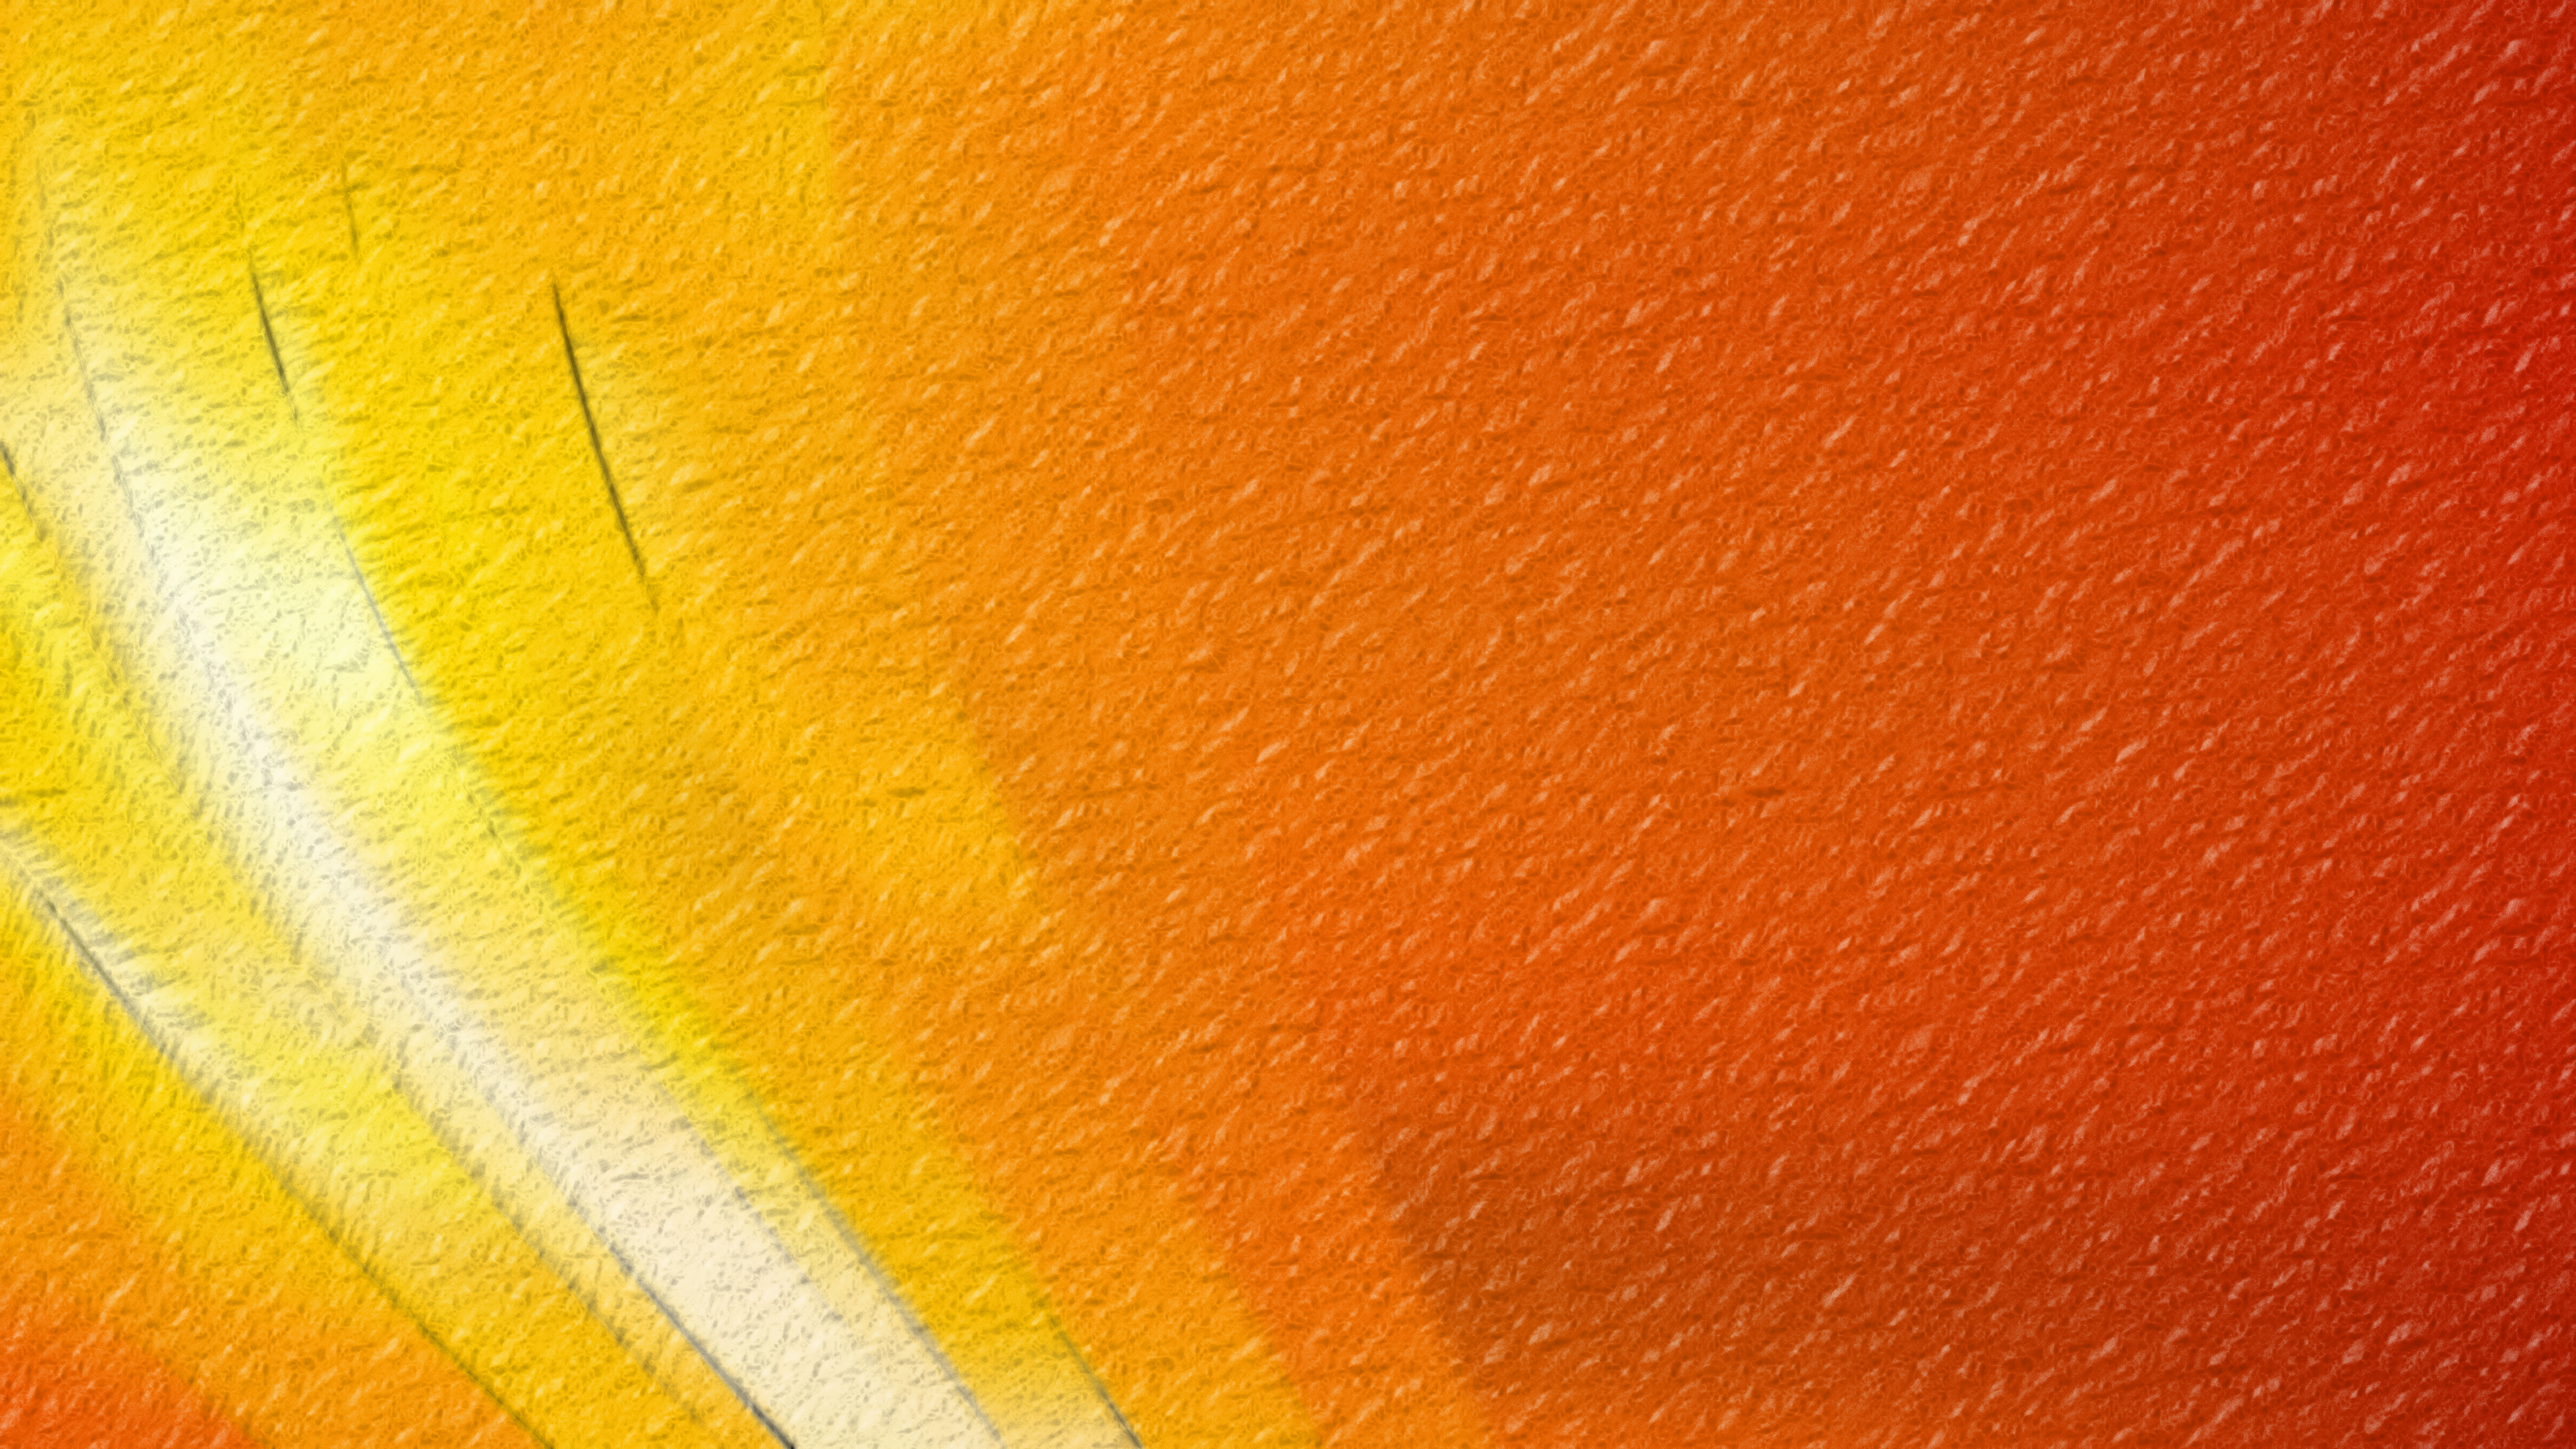 Free Abstract Orange and Yellow Texture Background Image